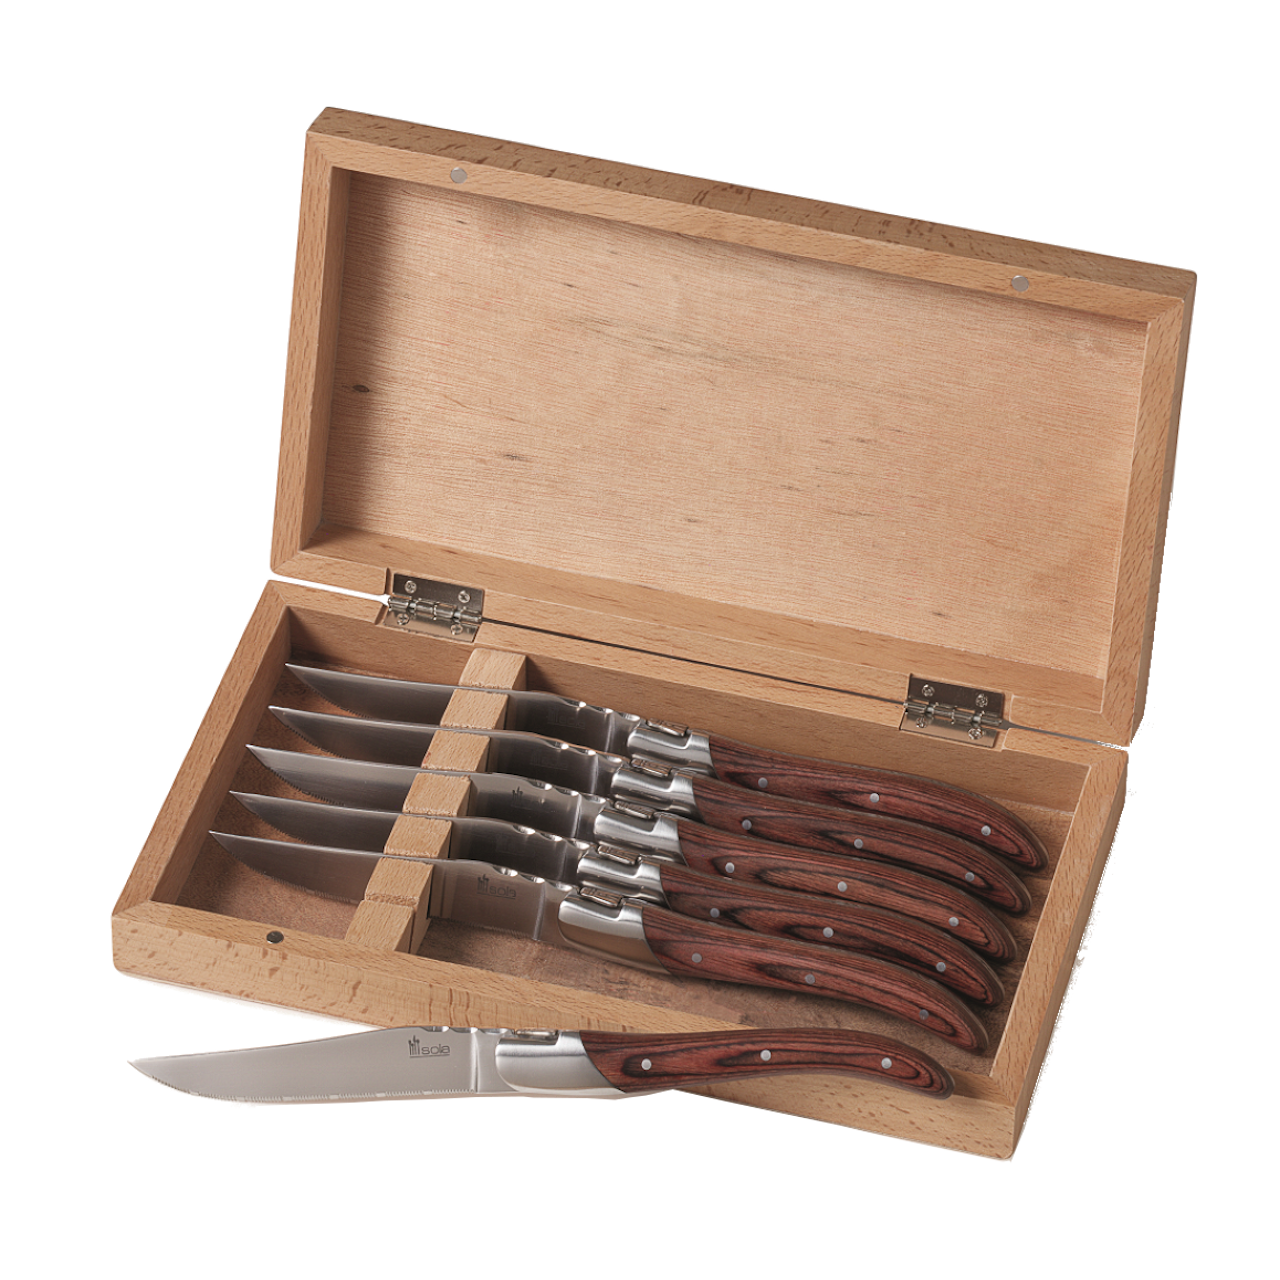 Steak Knife Set 6 Pieces with Box - SOLA